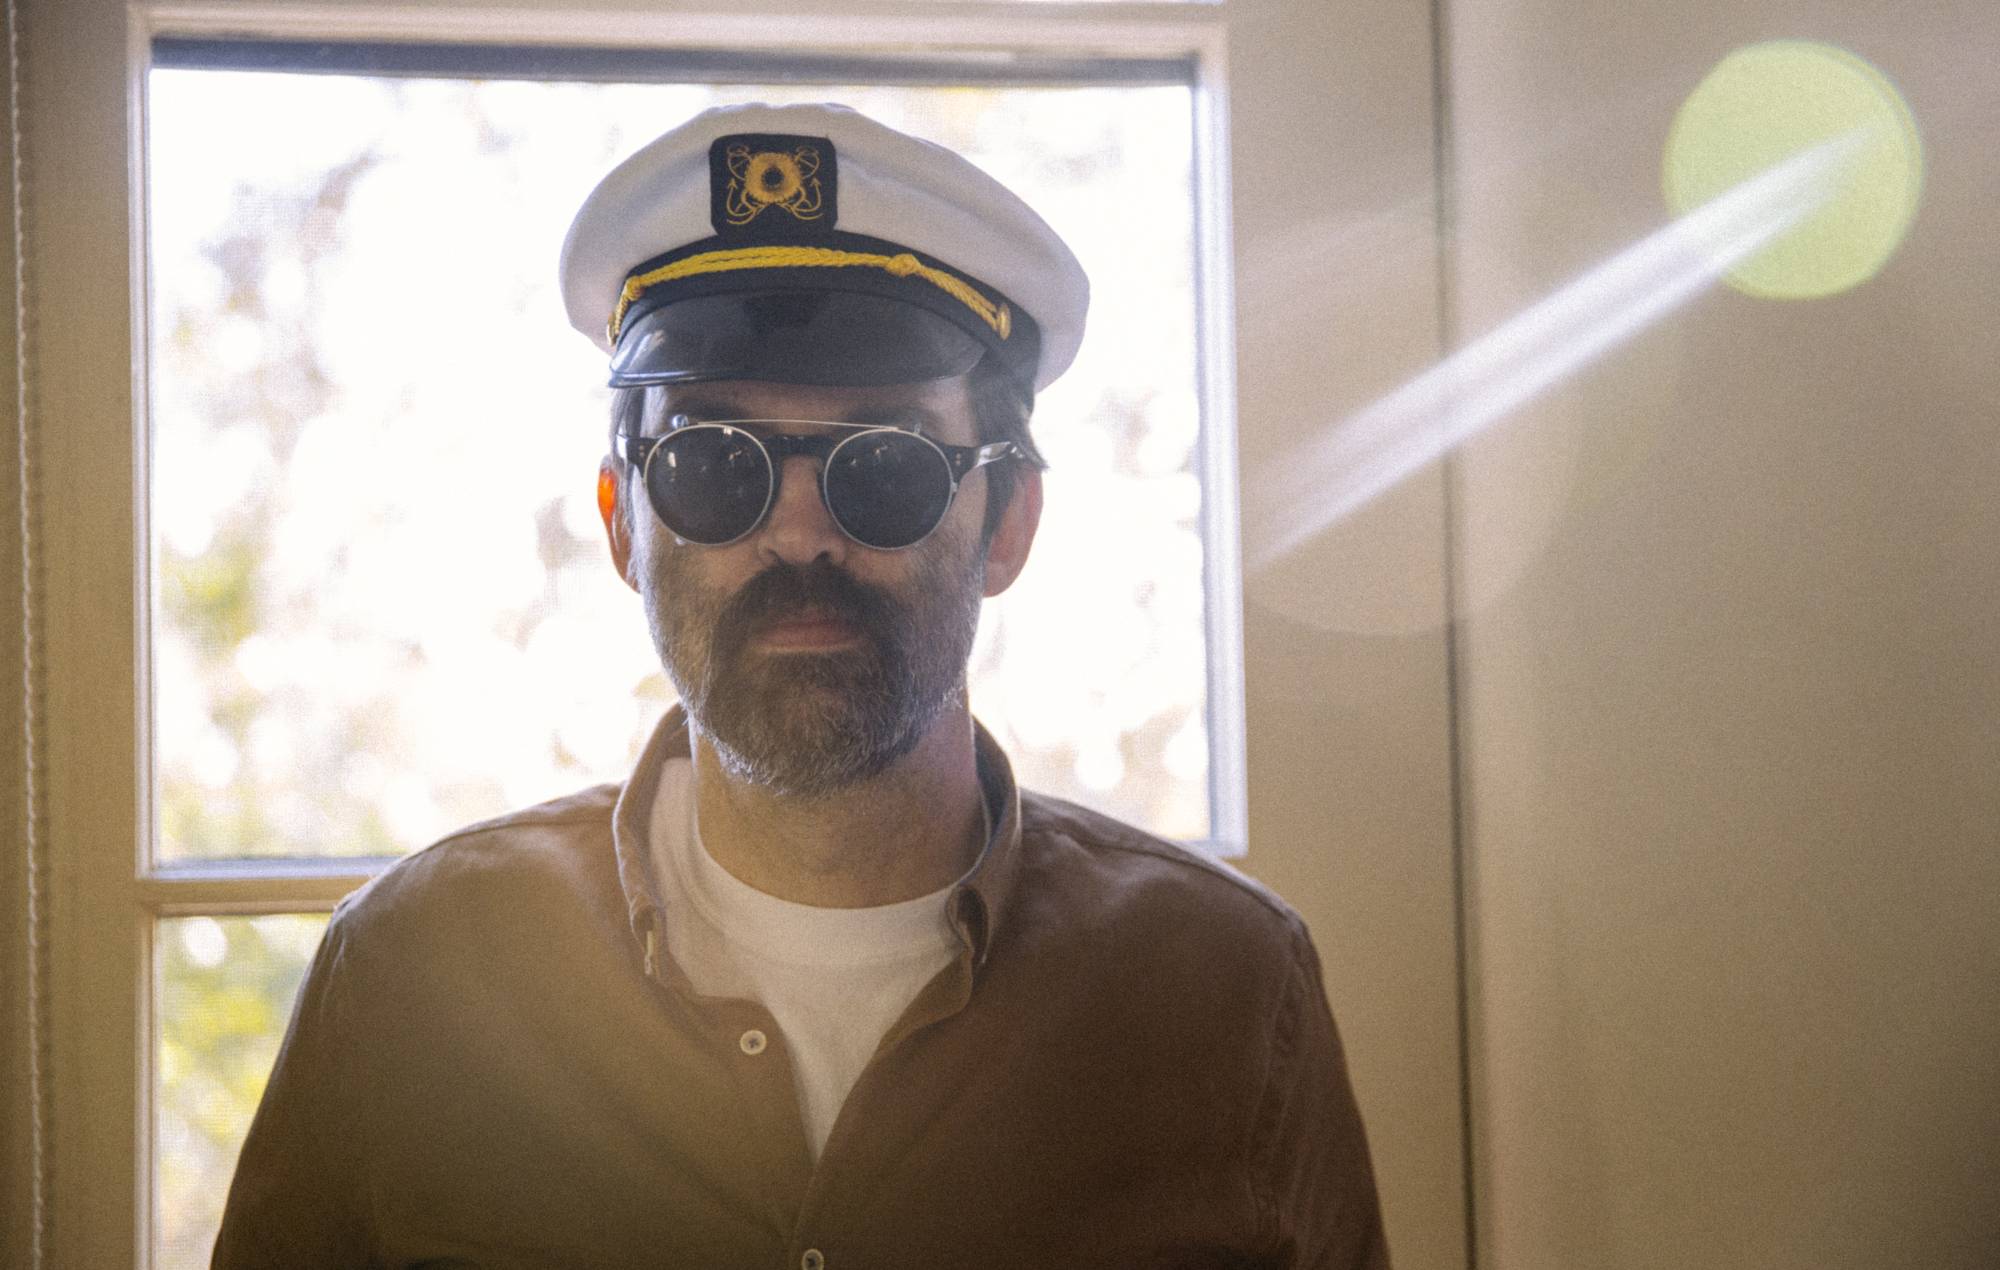 Eels’ Mark E Everett on wanting to “bury the hatchet” with Colin Firth